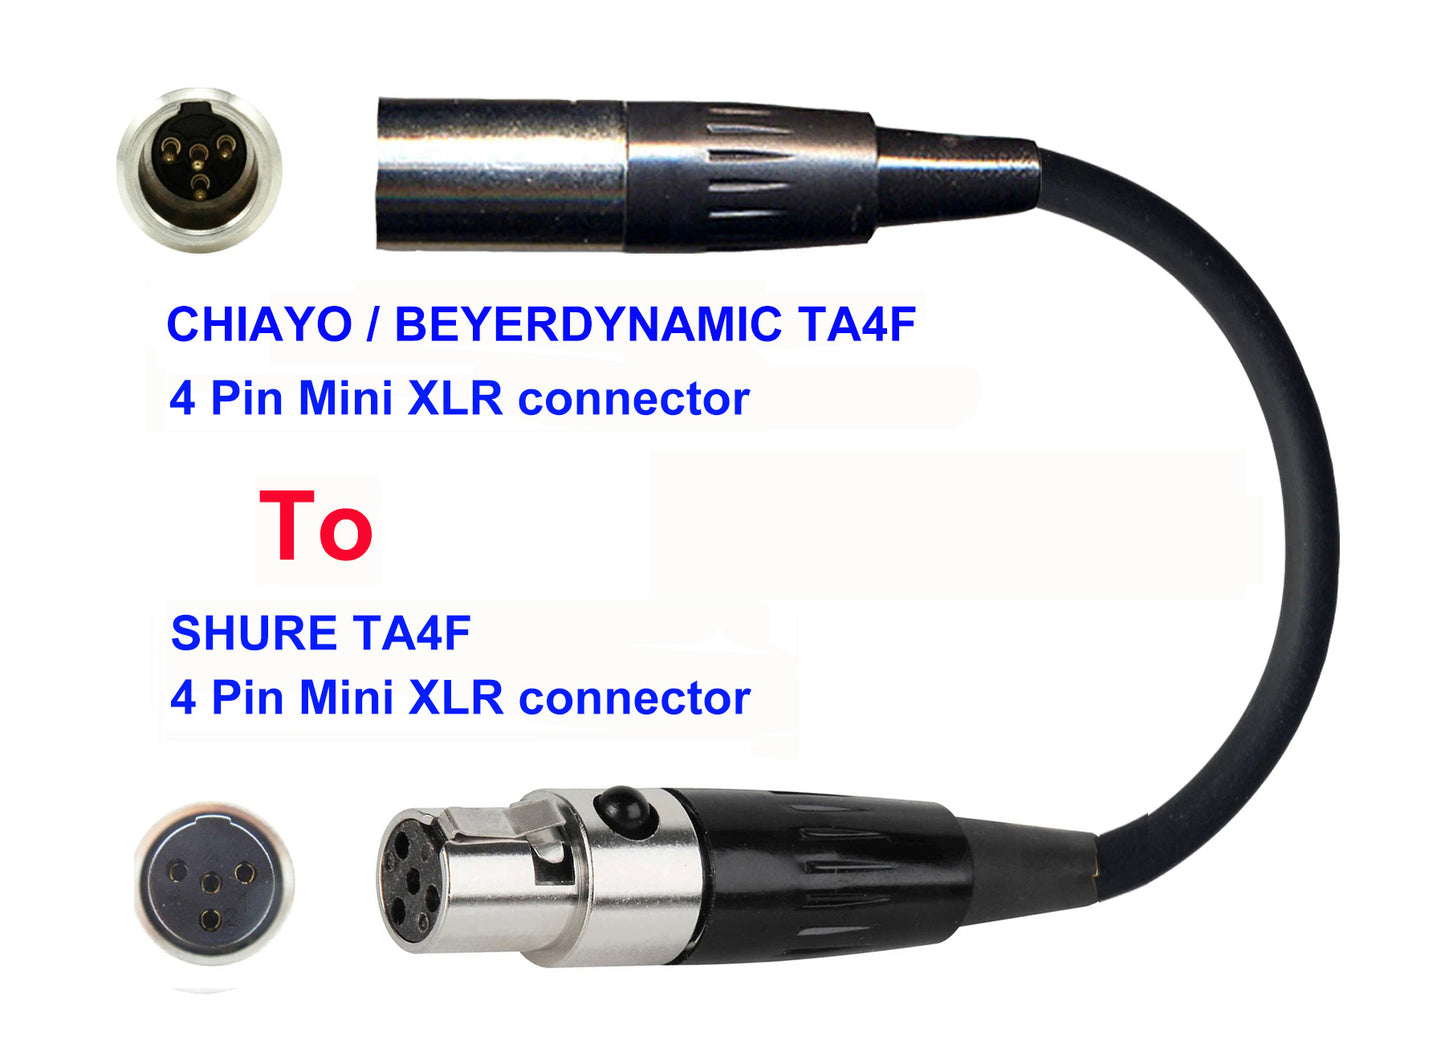 Microphone Adapter - Chiayo / JTS / Line6 / Beyerdynamic Microphones with TA4F 4 pin mini XLR connector TO Shure Transmitters with 4pin TA4M connector